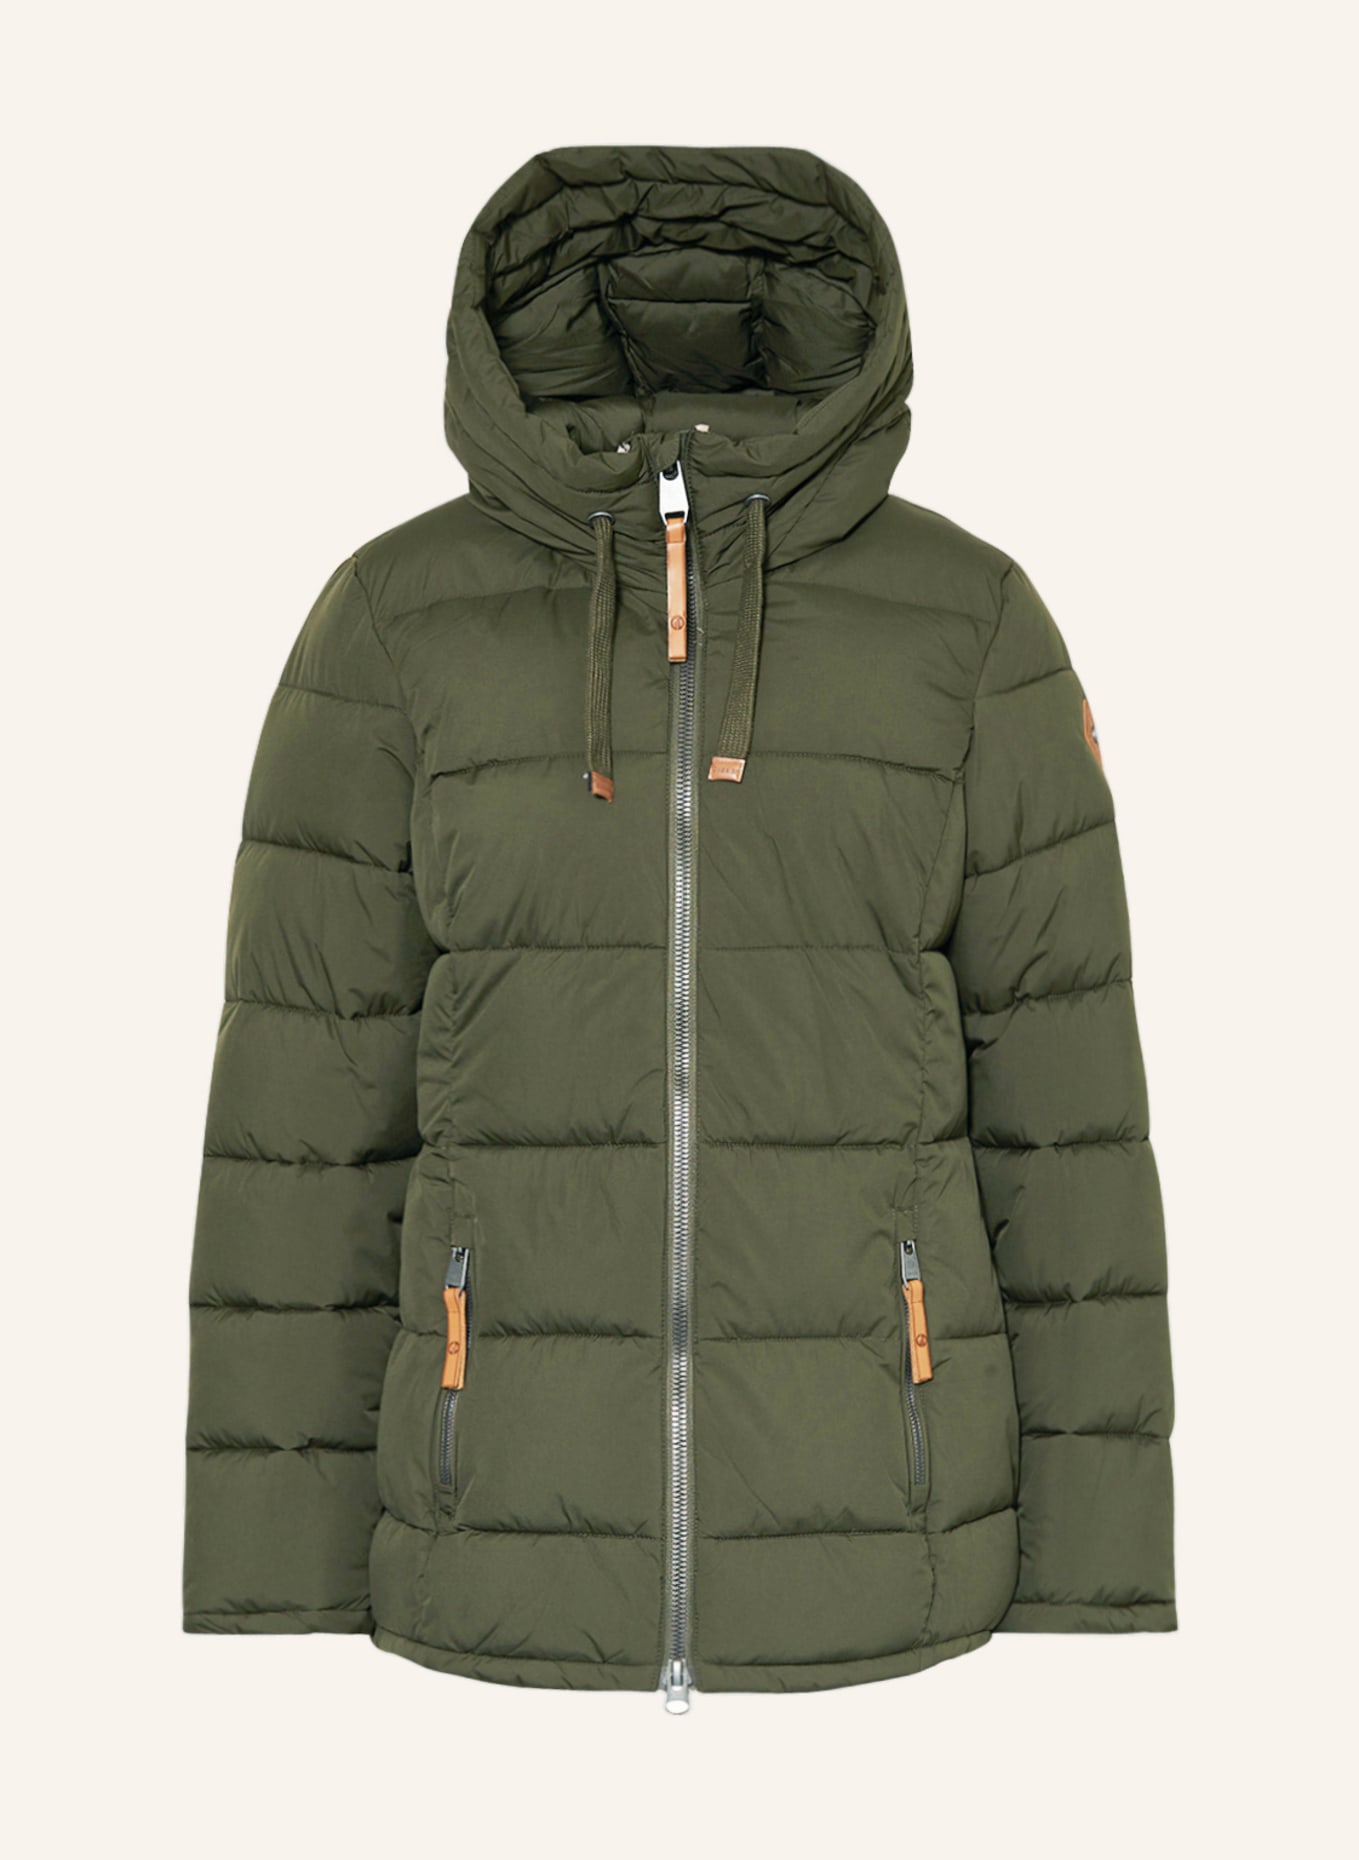 Quilted by killtec G.I.G.A. DX olive in jacket